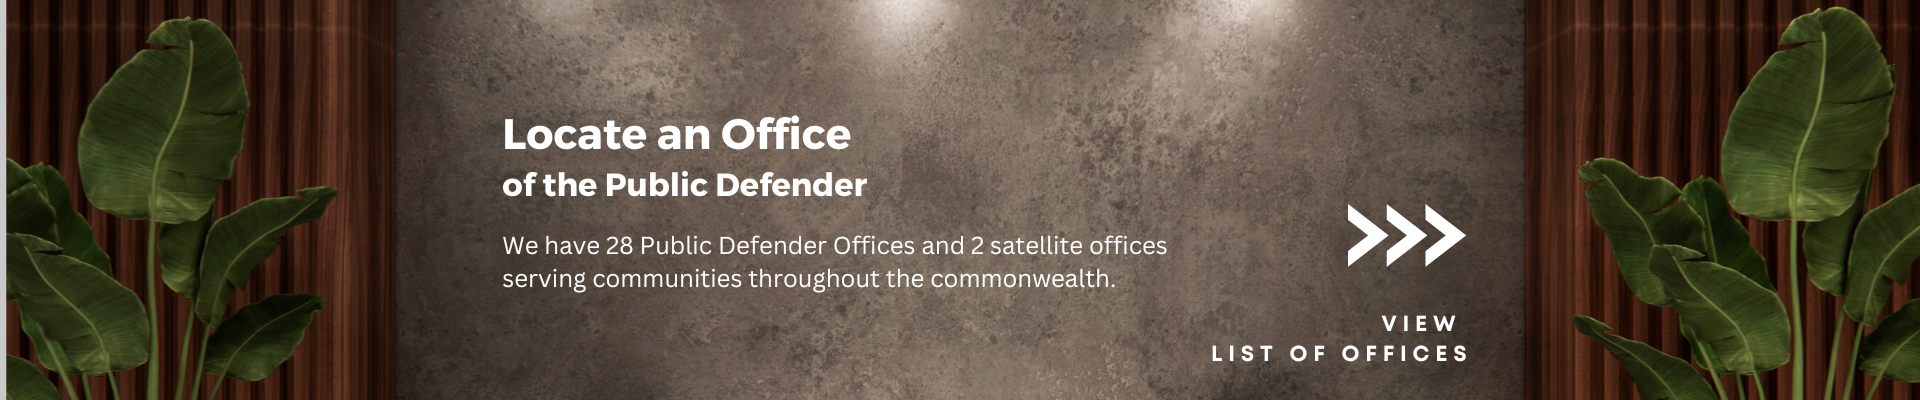 Locate an Office of the Public Defender. We have 28 offices and 2 satellite offices across the commonwealth of Virginia